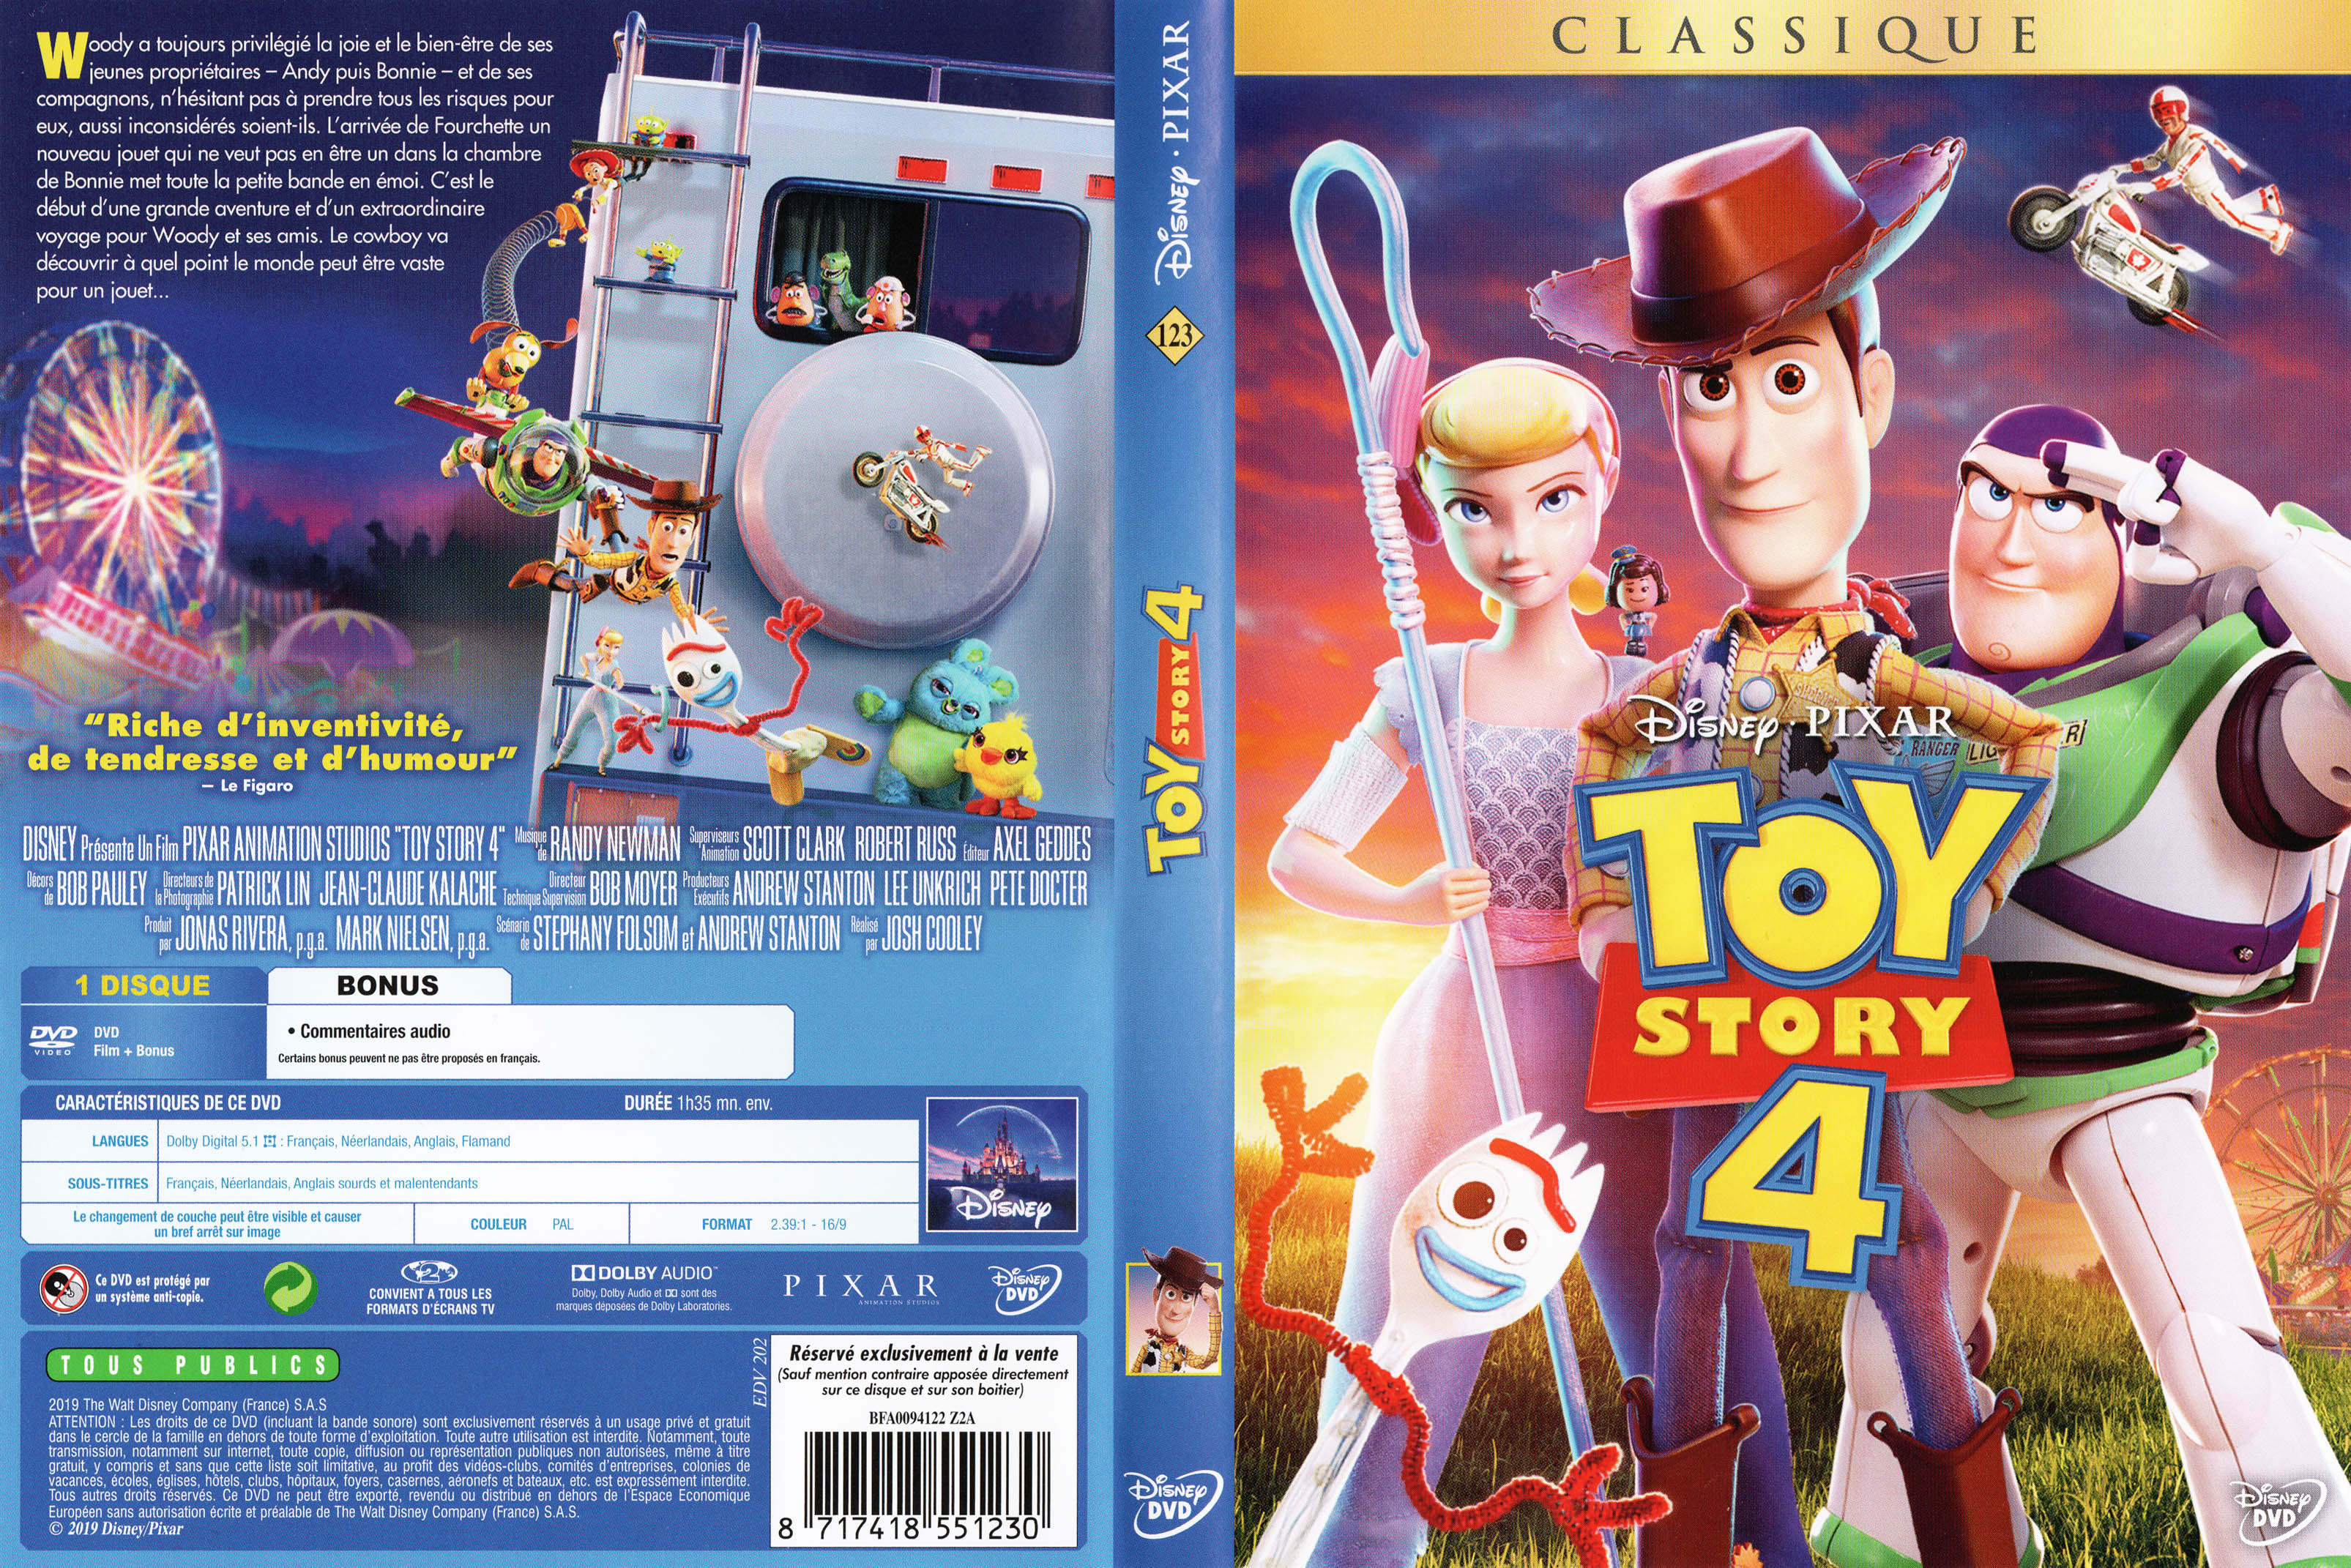 Jaquette DVD Toy Story 4 v2